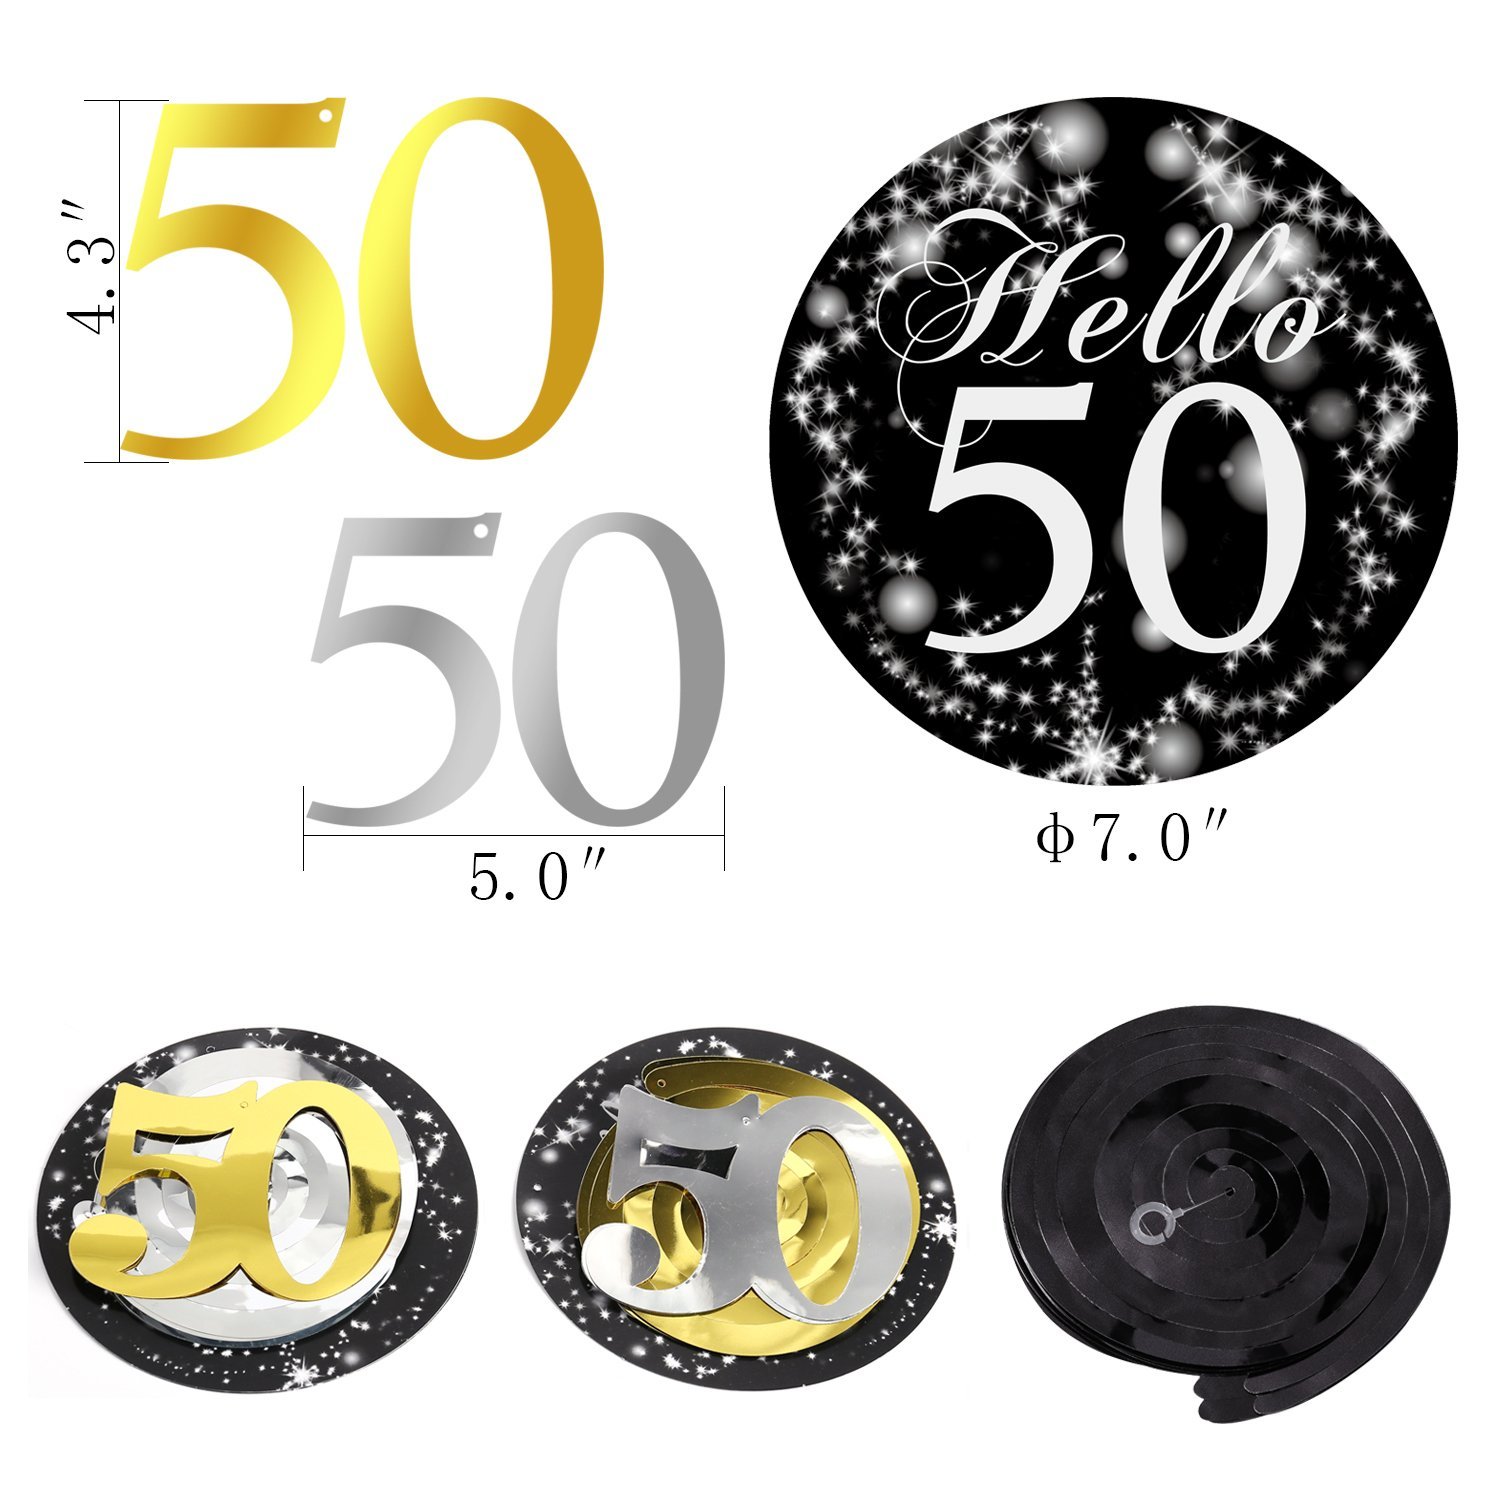 Konsait 50th Birthday Decorations Kit Cheers to 50 Years Banner Swallowtail Bunting Garland Sparkling Celebration 50 Hanging Swirls,Perfect 50 Years Old Party Supplies 50th Anniversary Decorations